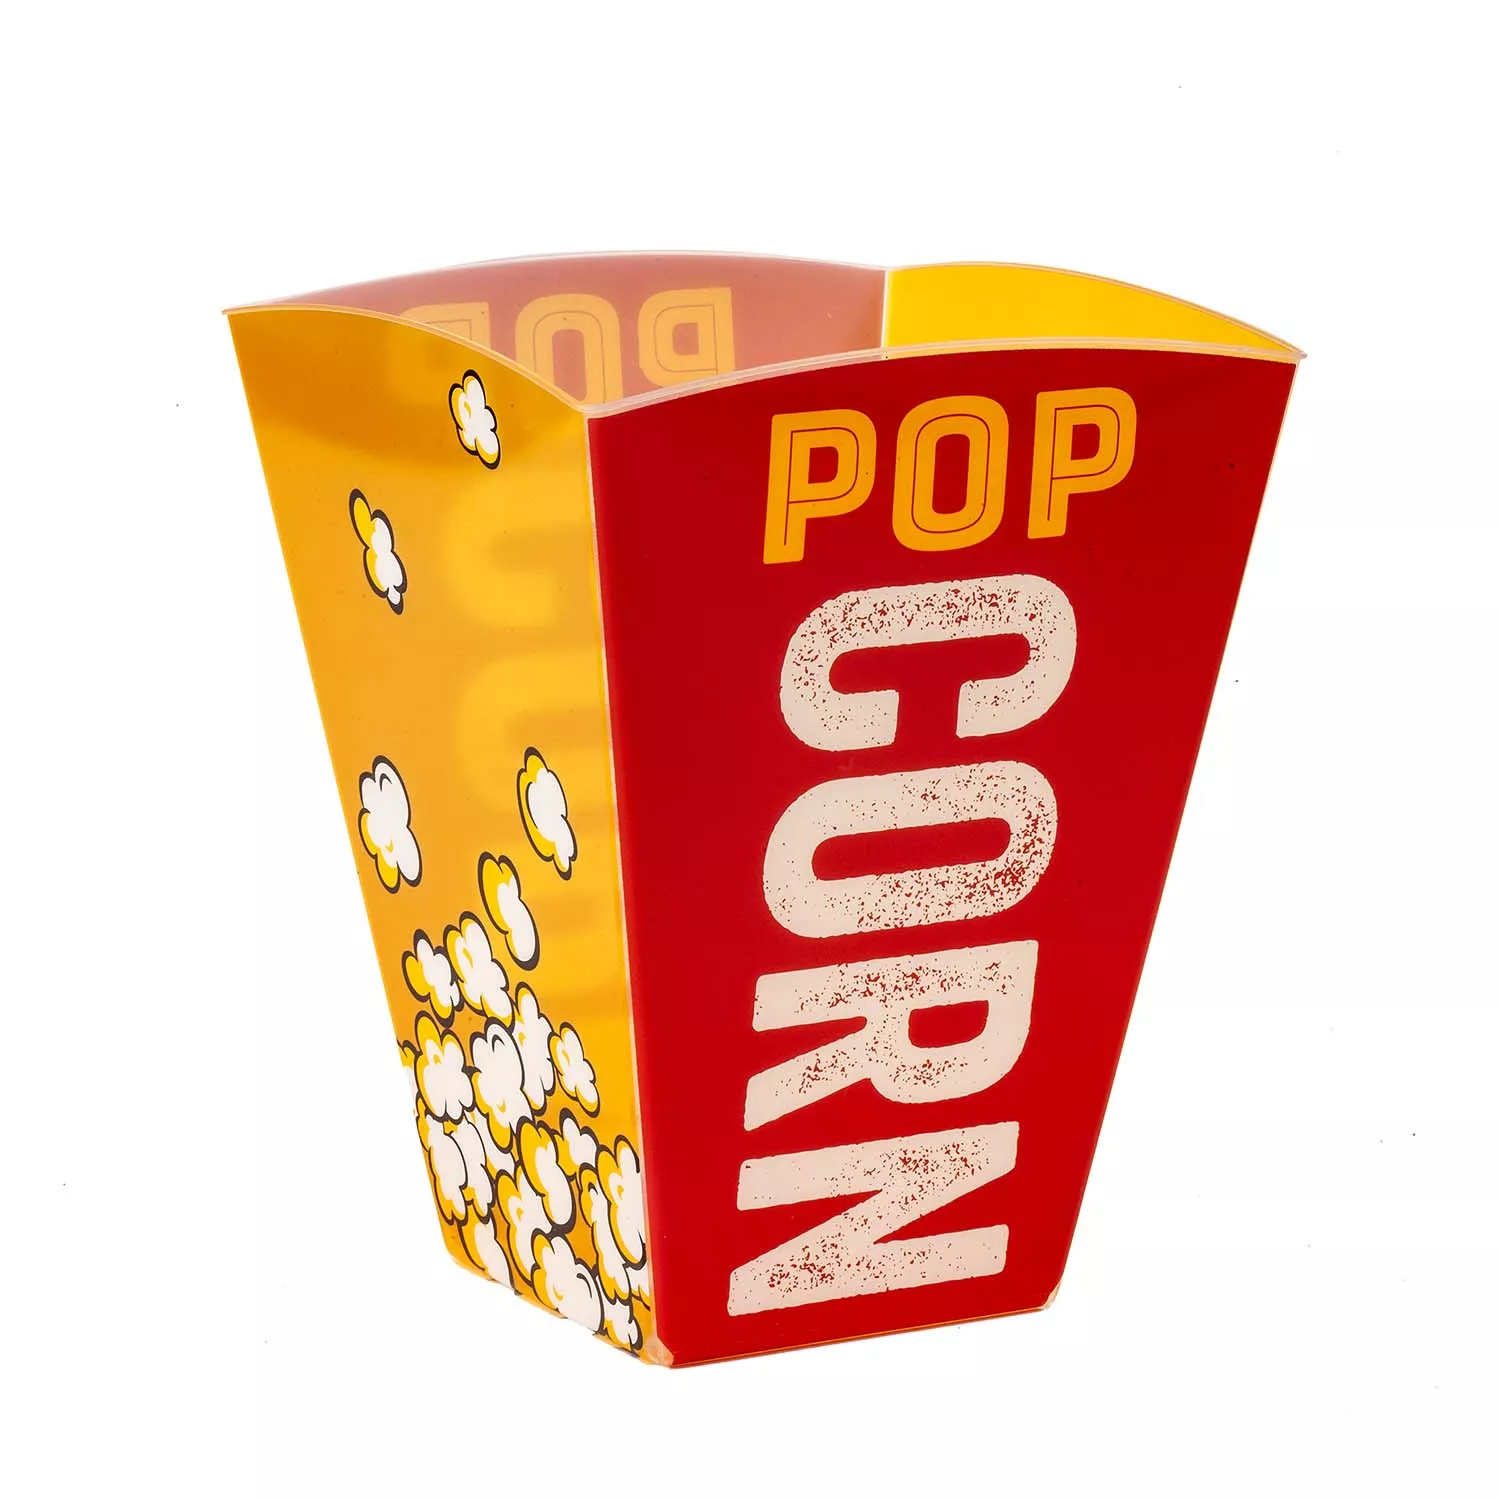 Whirley Pop Shop  Popcorn Popping Kits: Sample Pack